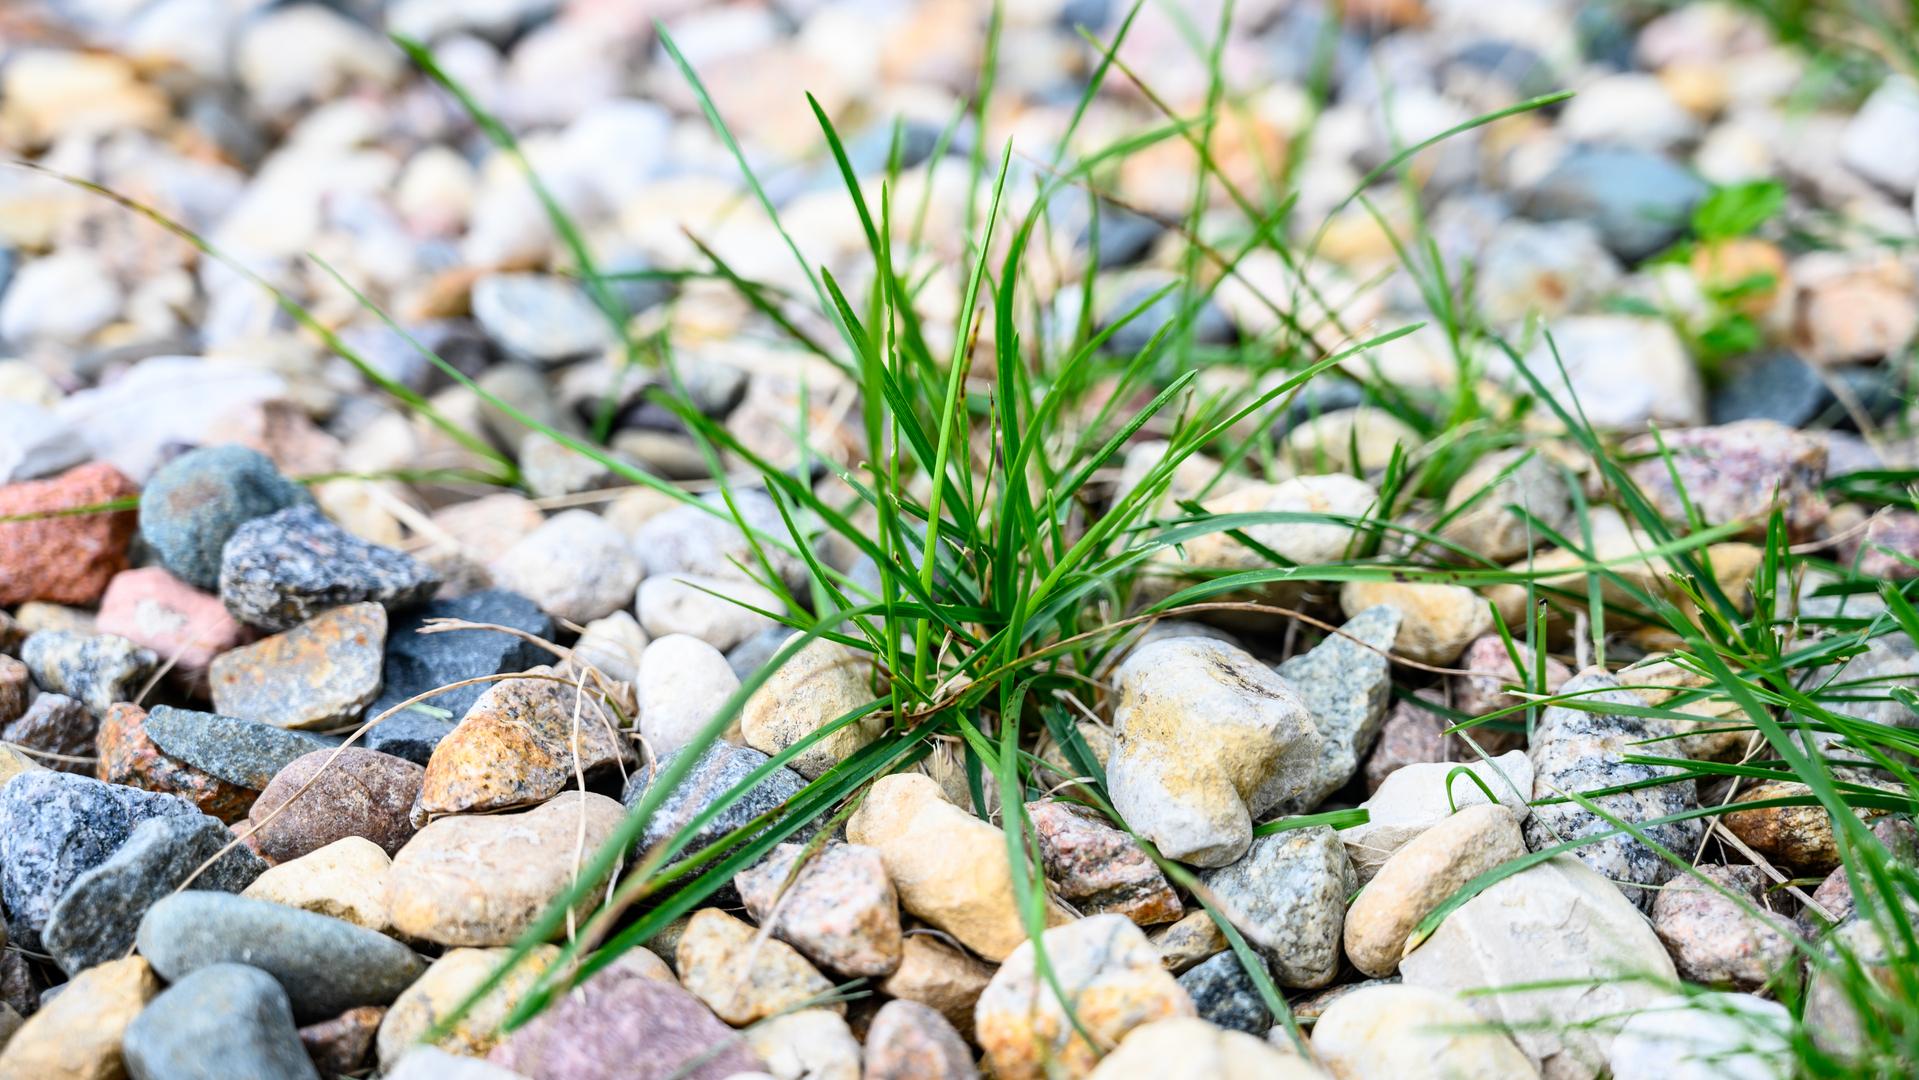 Are There Any Weeds in Your Landscape Beds? Remove Them ASAP!